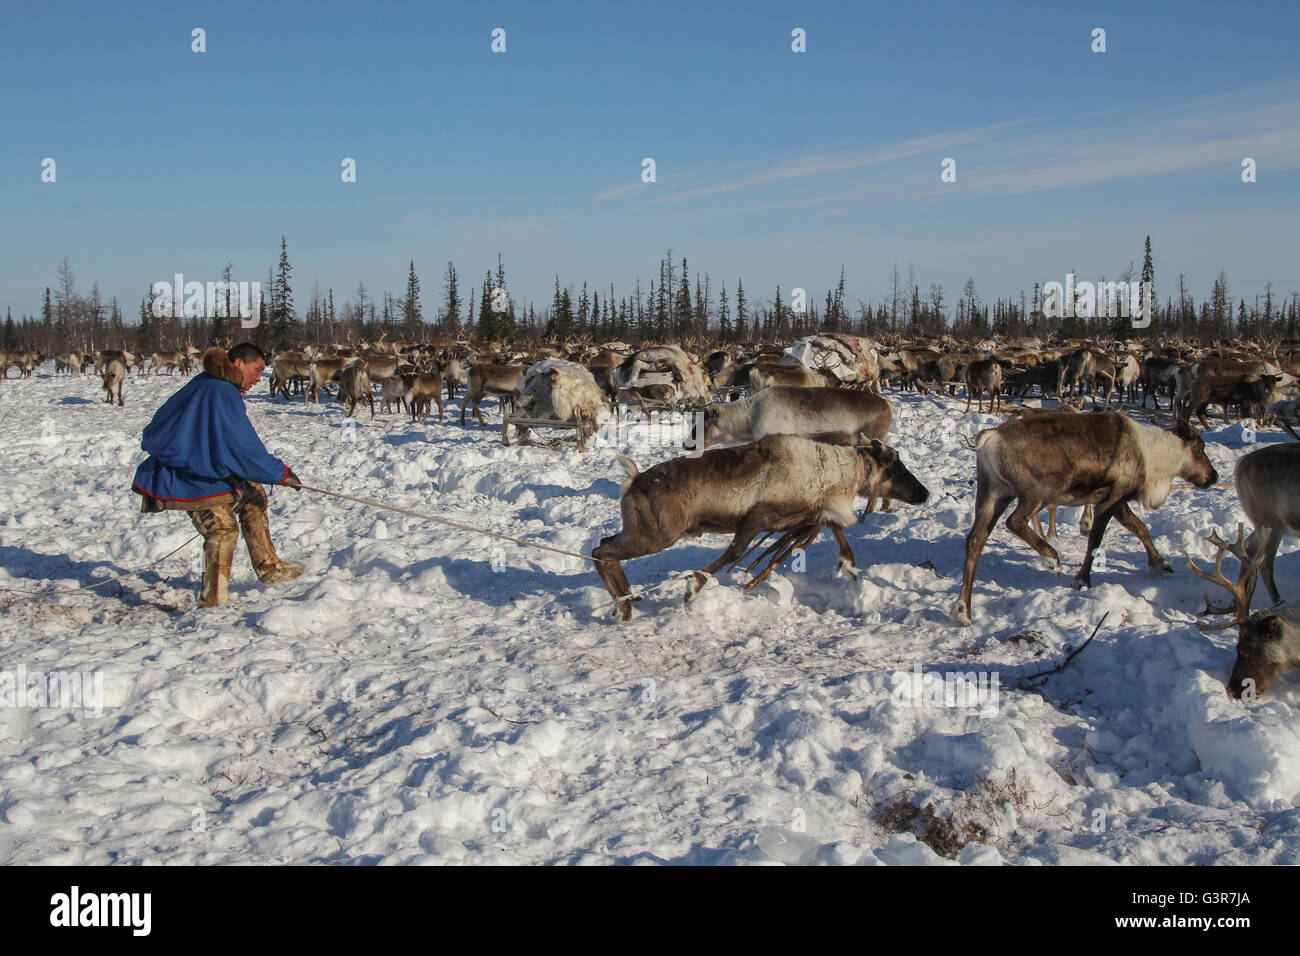 Trapping deer using arcana. Camp of reindeer herders of the Yamal tundra. Stock Photo